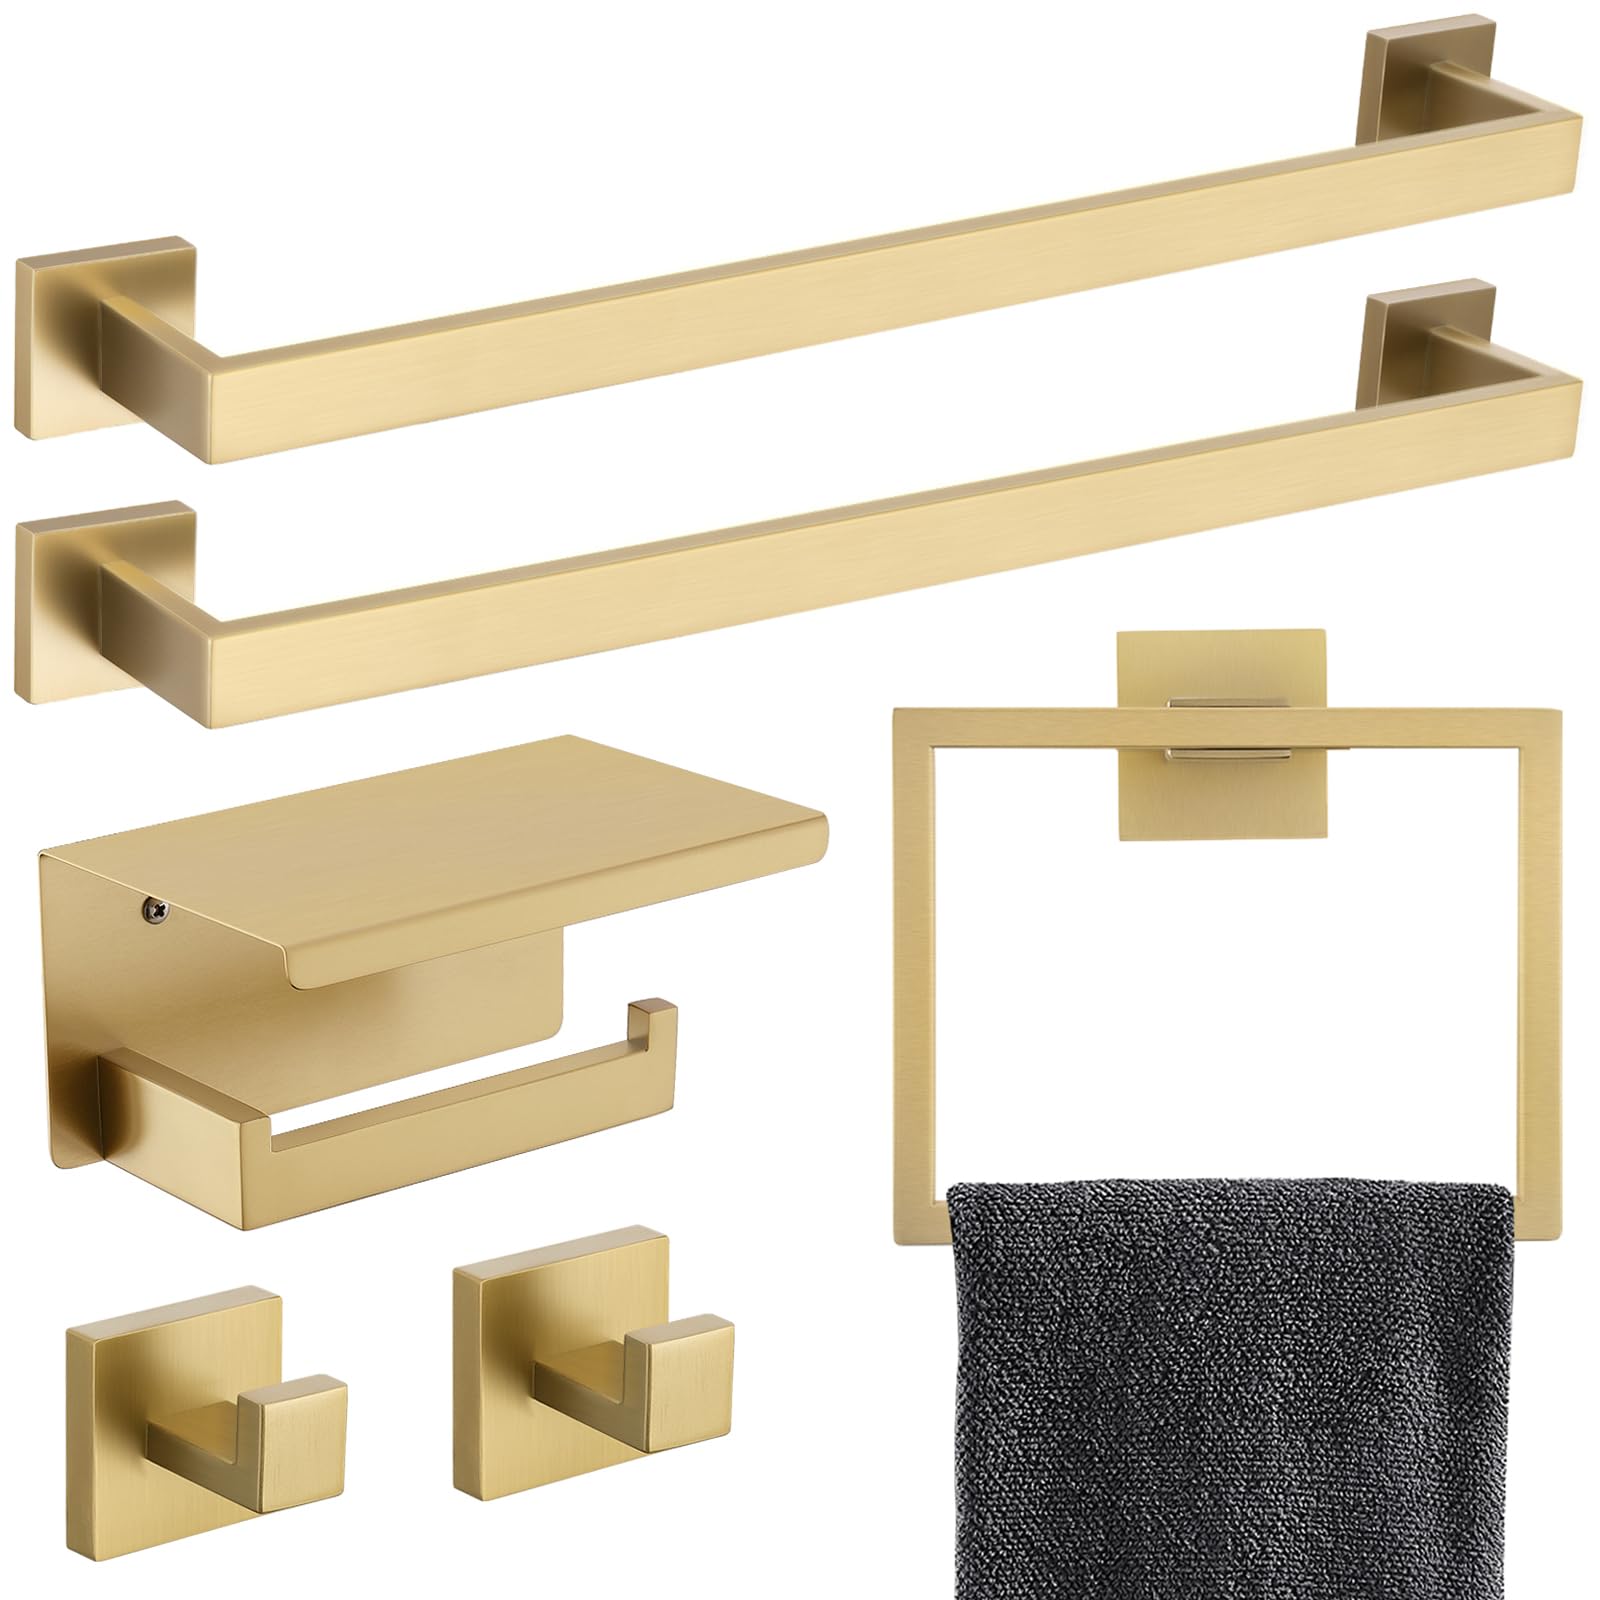 TNOMS 6-Piece Bathroom Hardware Set 23.6 Inch Gold Towel Bar Set Double Towel Bar Towel Ring Coat Hook and Toilet Paper Holder with Shelf Wall Mounted Stainless Steel Bathroom Accessories Set